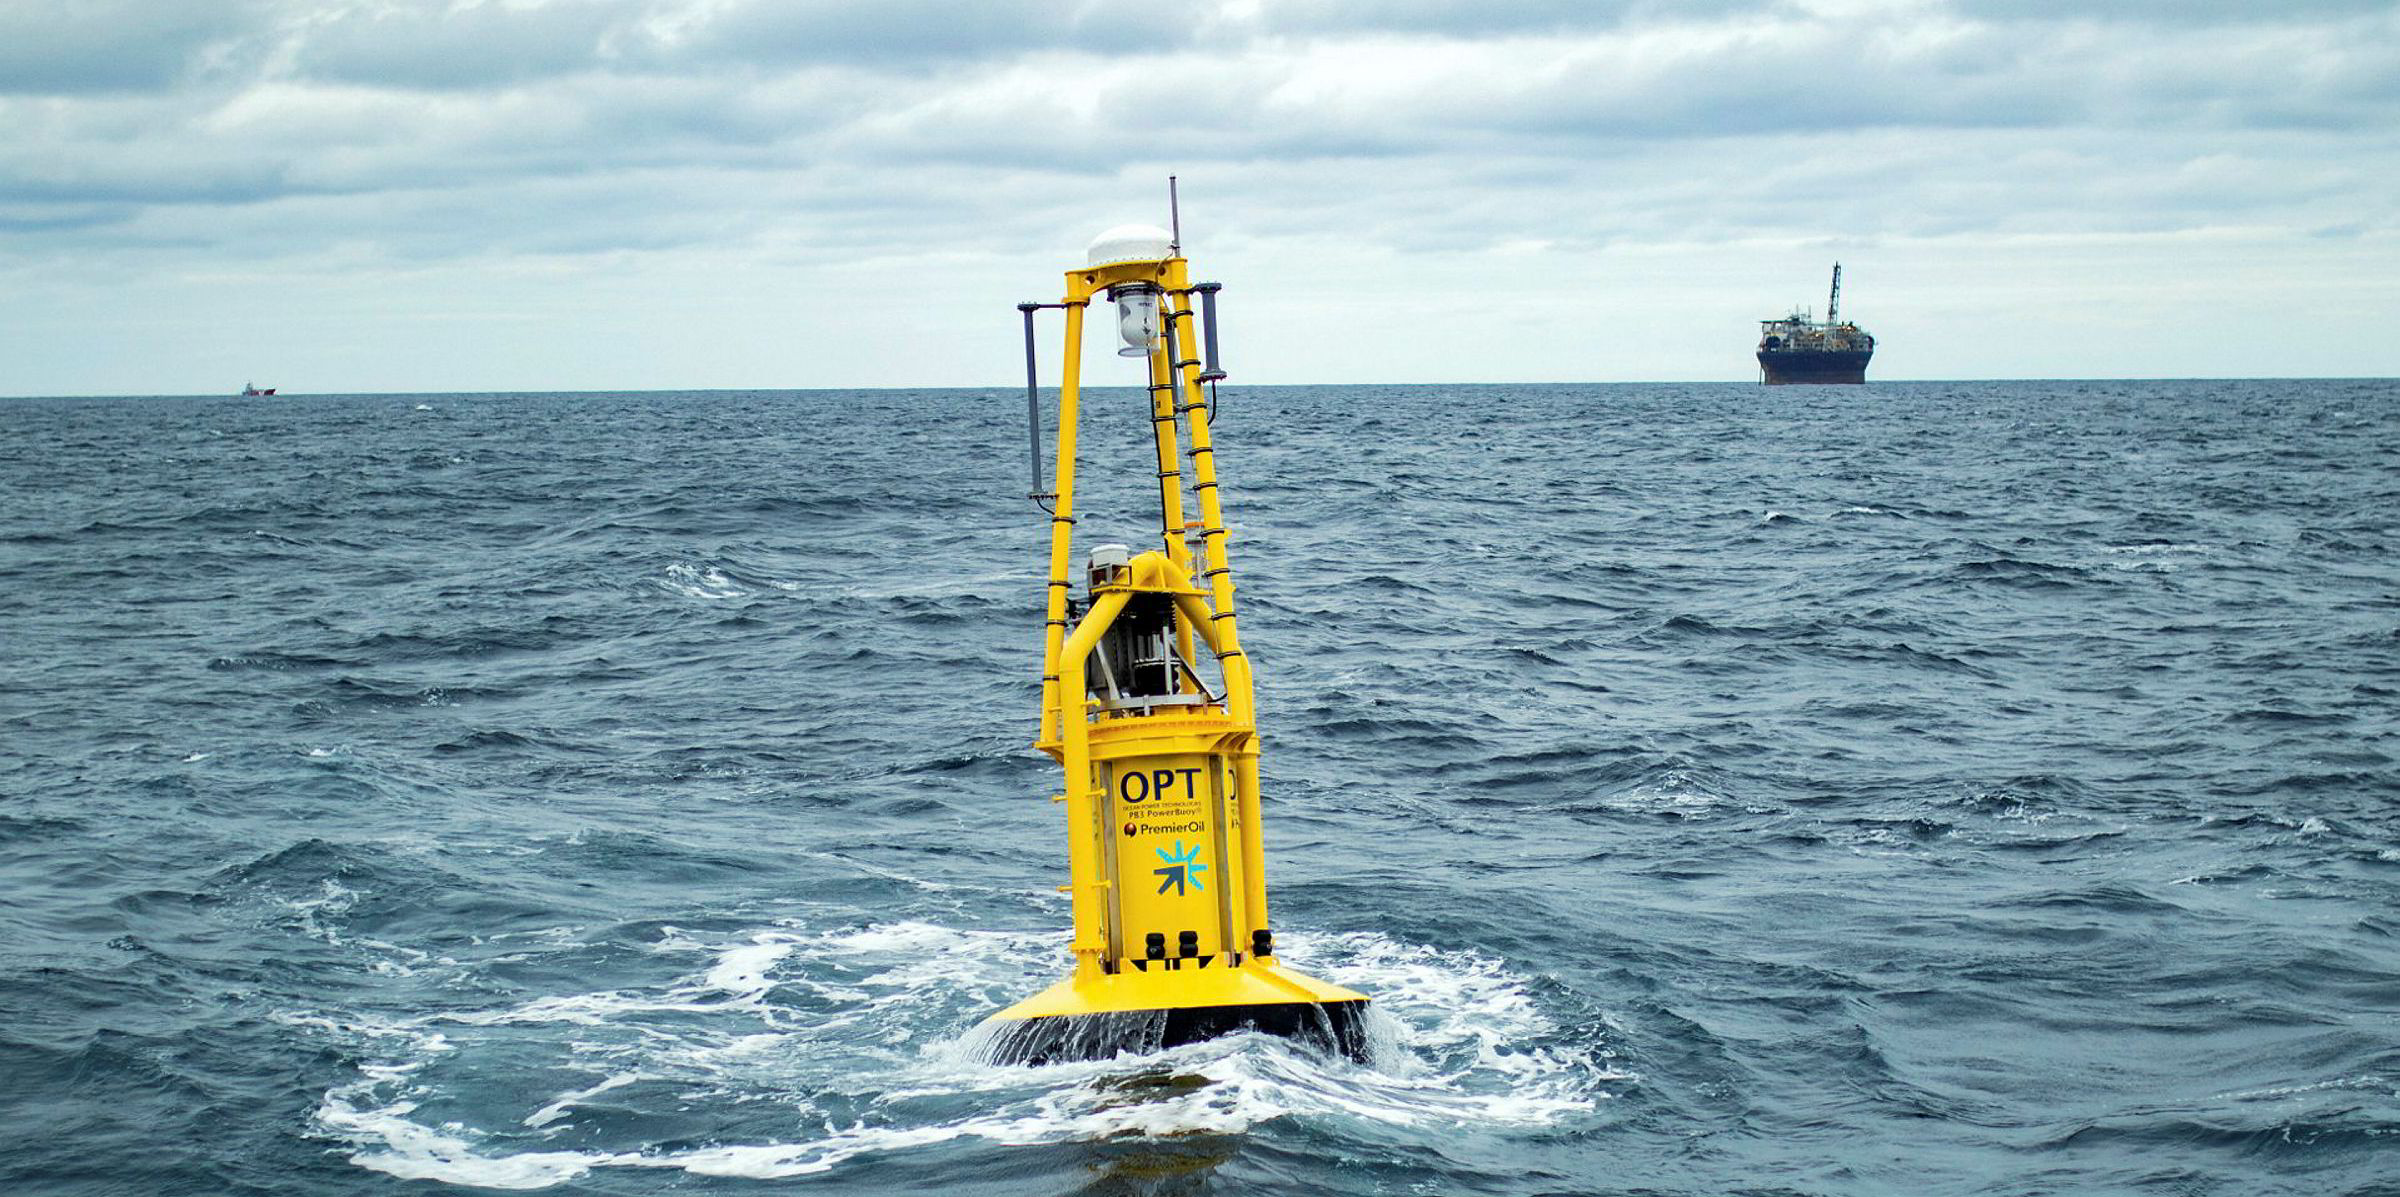 Powerbuoy Takes Premier Role For Opt Upstream Online